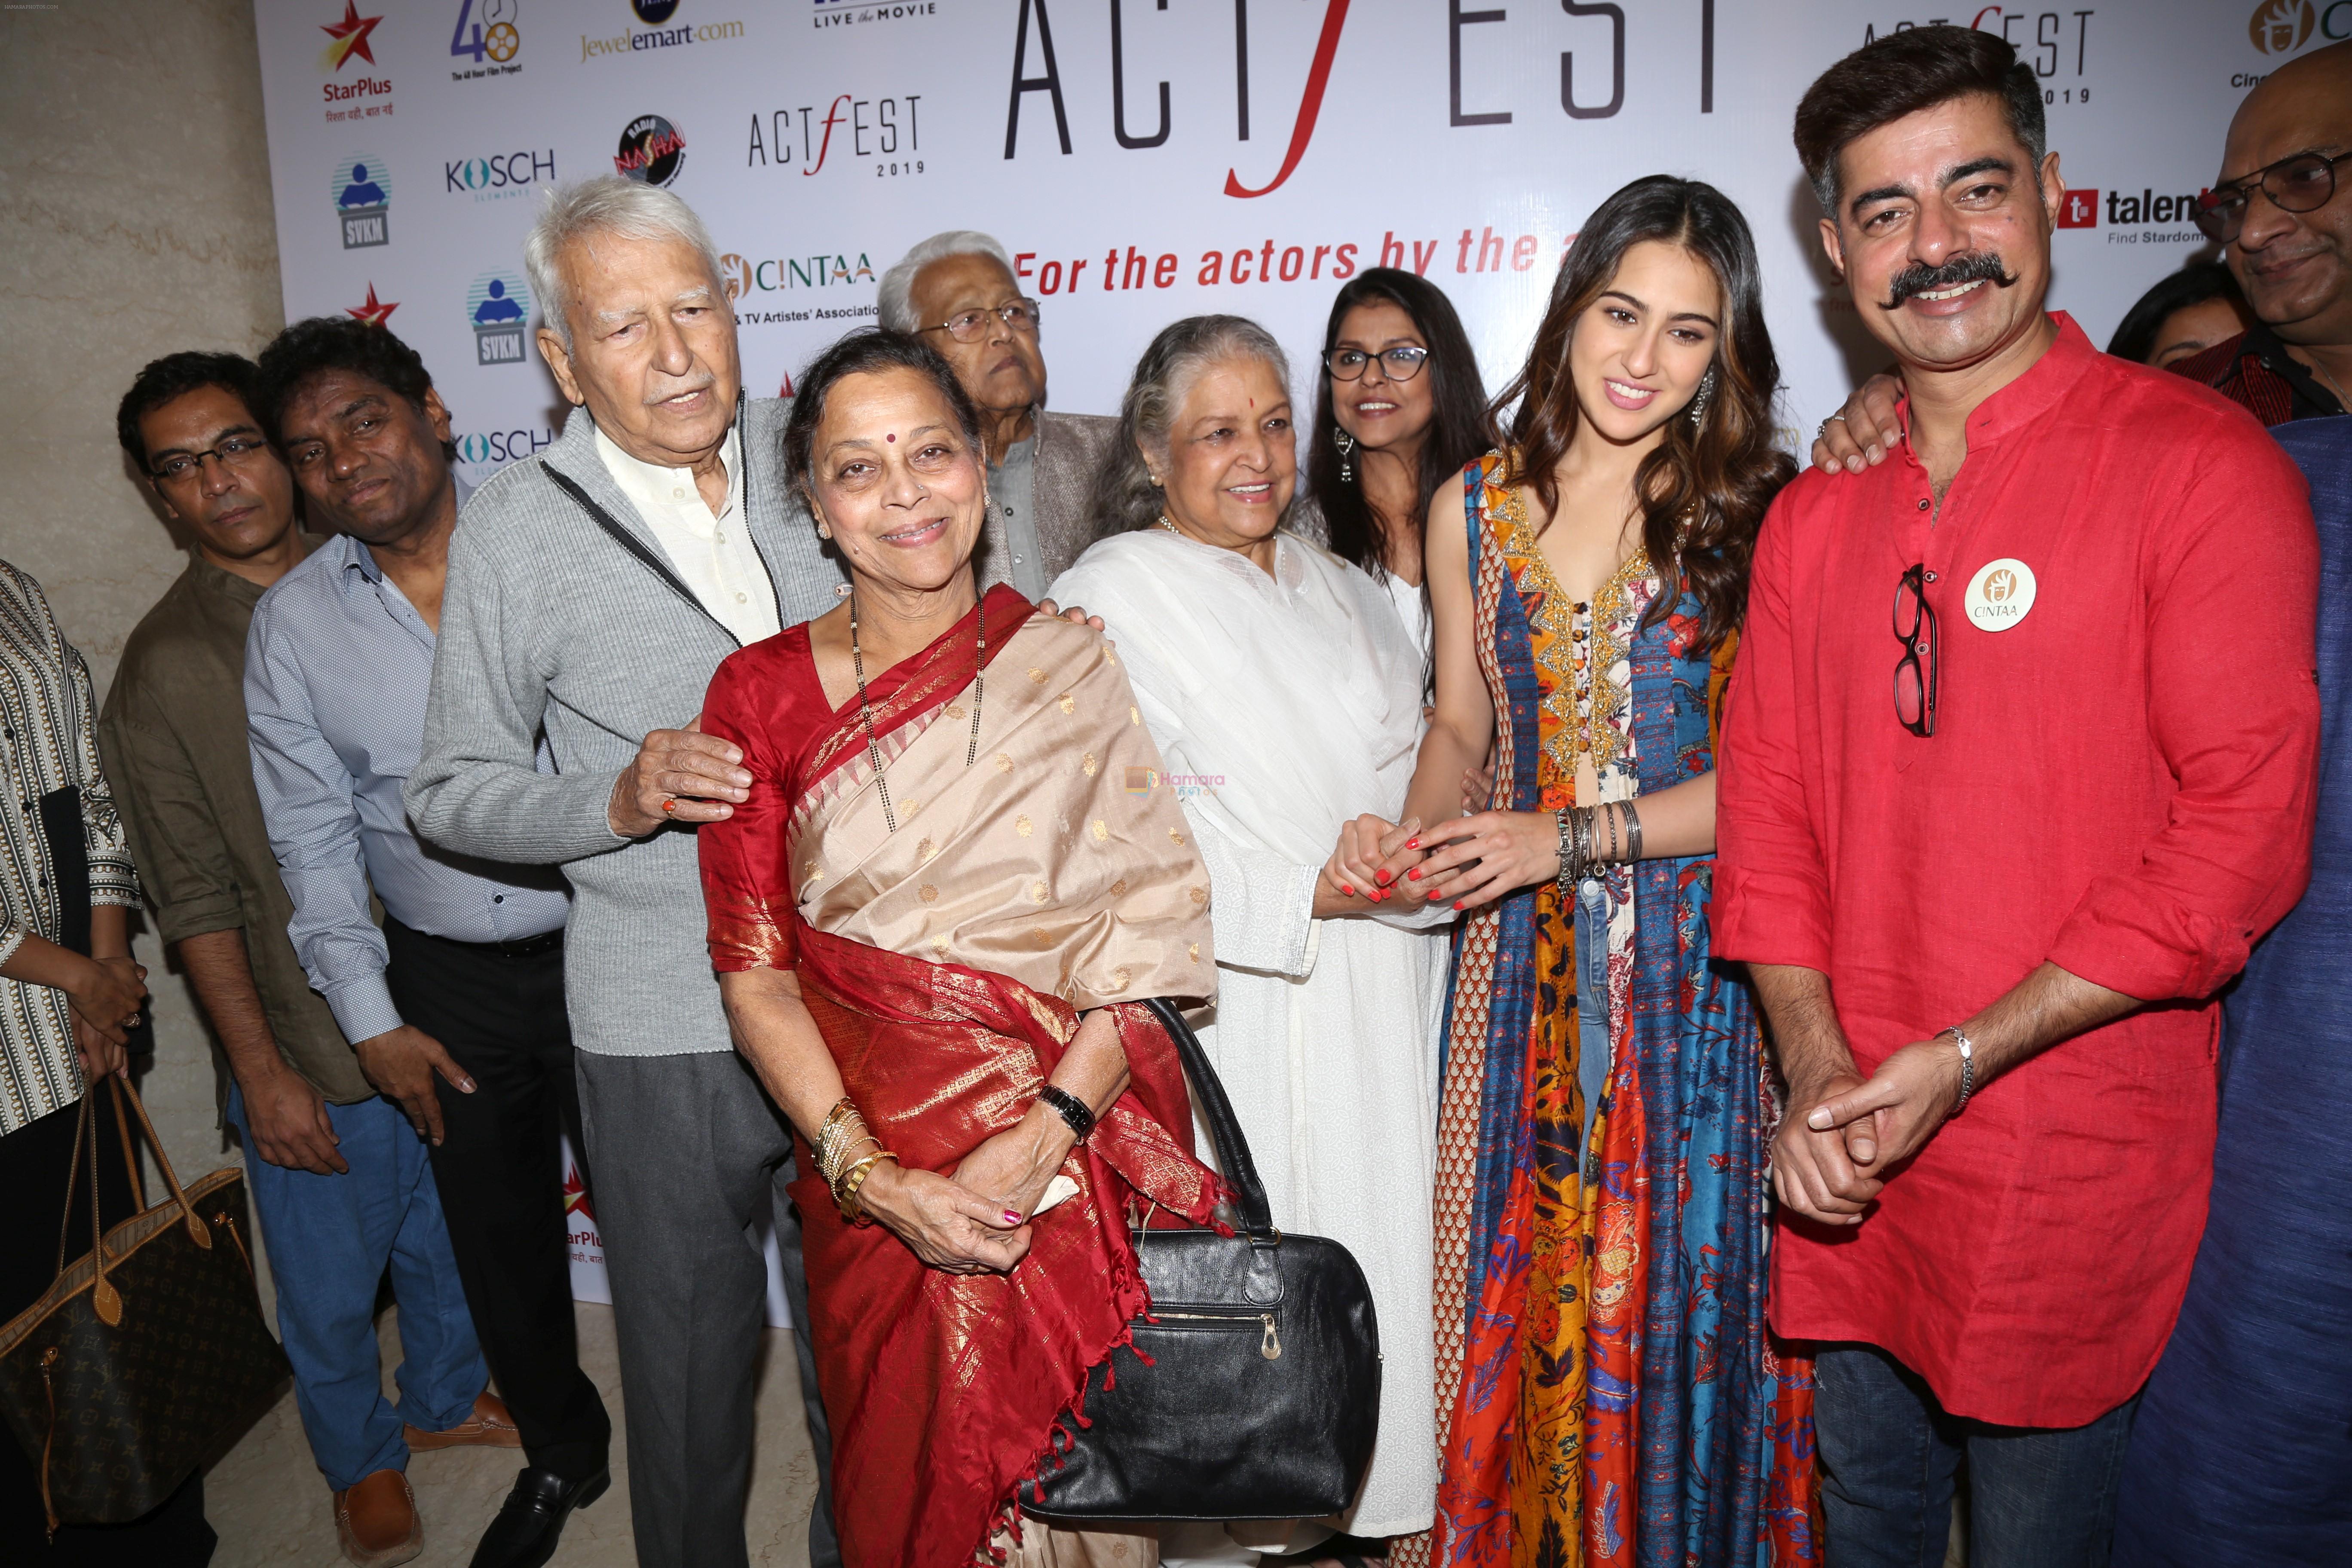 Manoj Joshi, Johnny Lever,Shubha Khote, Sara Ali KHan, Sushant Singh at the Cintaa 48hours film project's actfest at Mithibai College in vile Parle on 17th Feb 2019